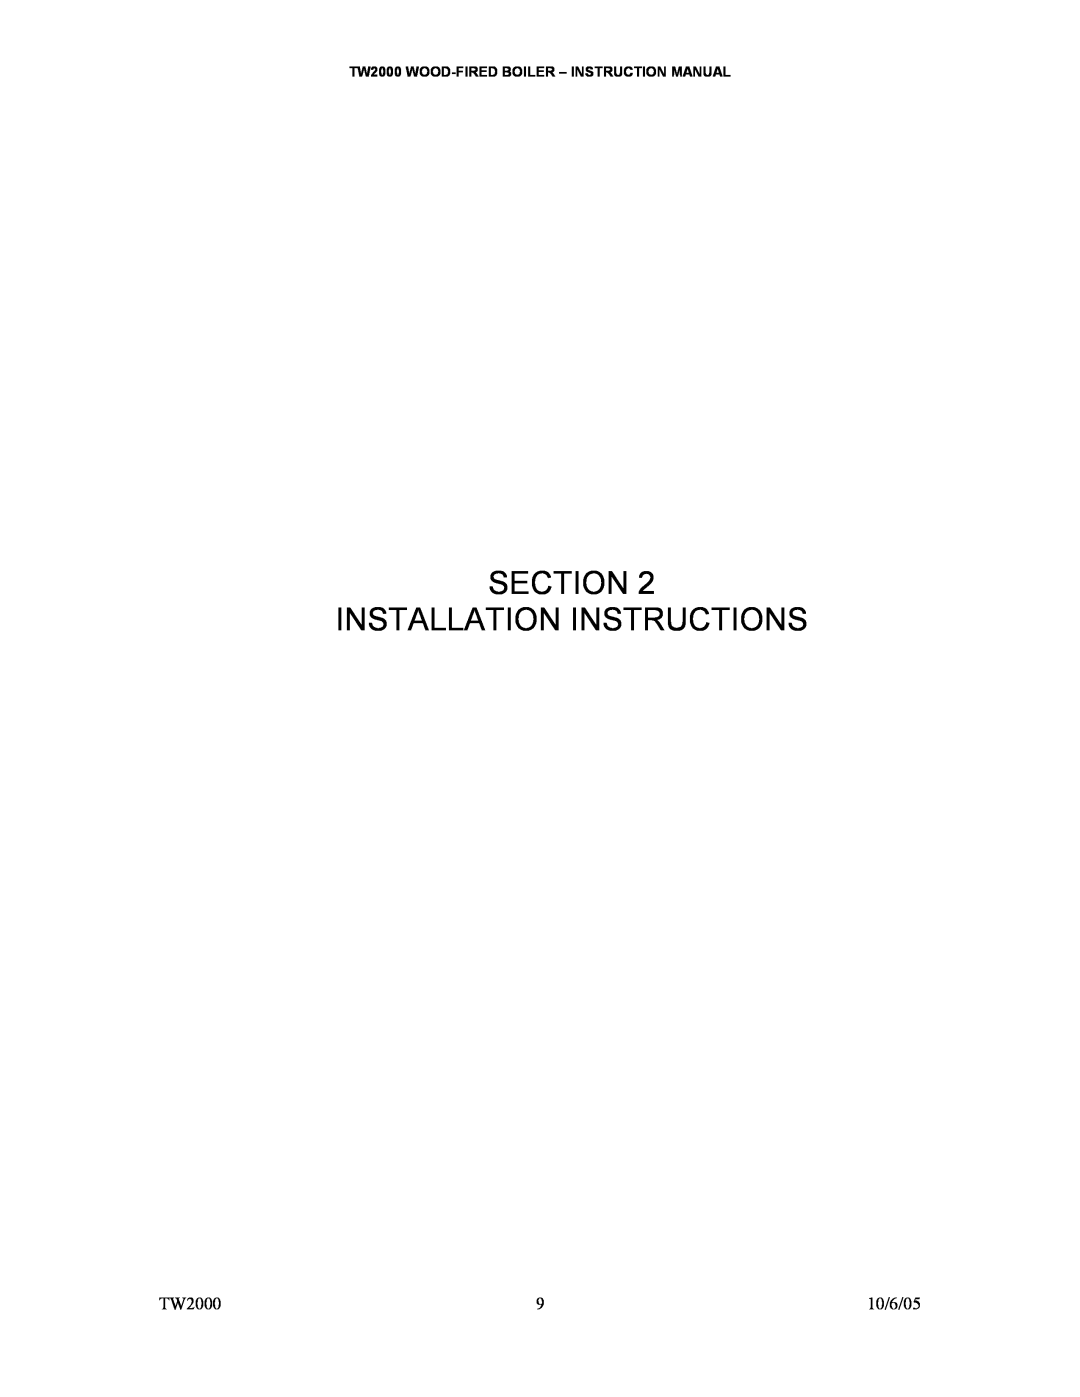 White Rodgers TW2000 owner manual Section Installation Instructions, 10/6/05 